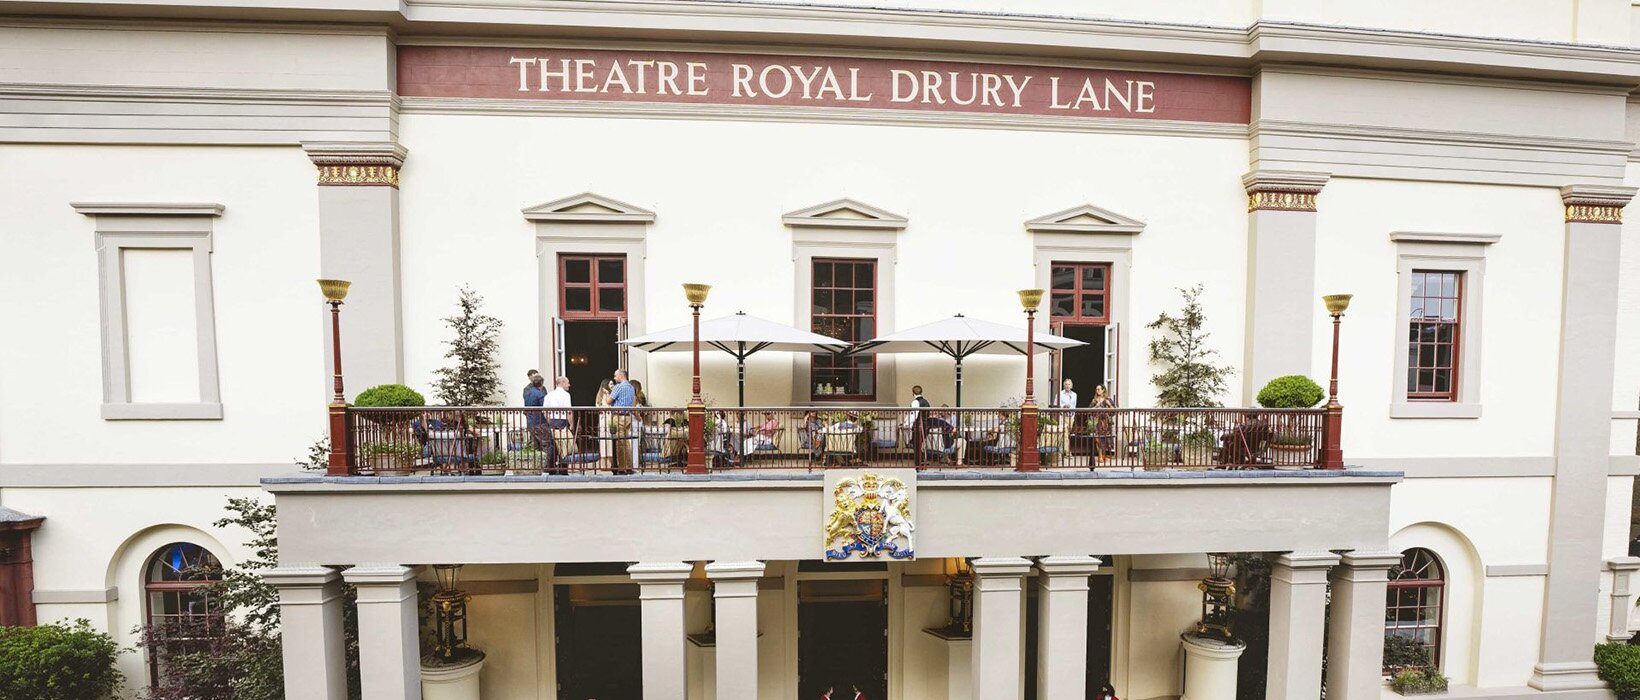 Jamie Oliver to return to London restaurant scene with Theatre Royal Drury Lane opening